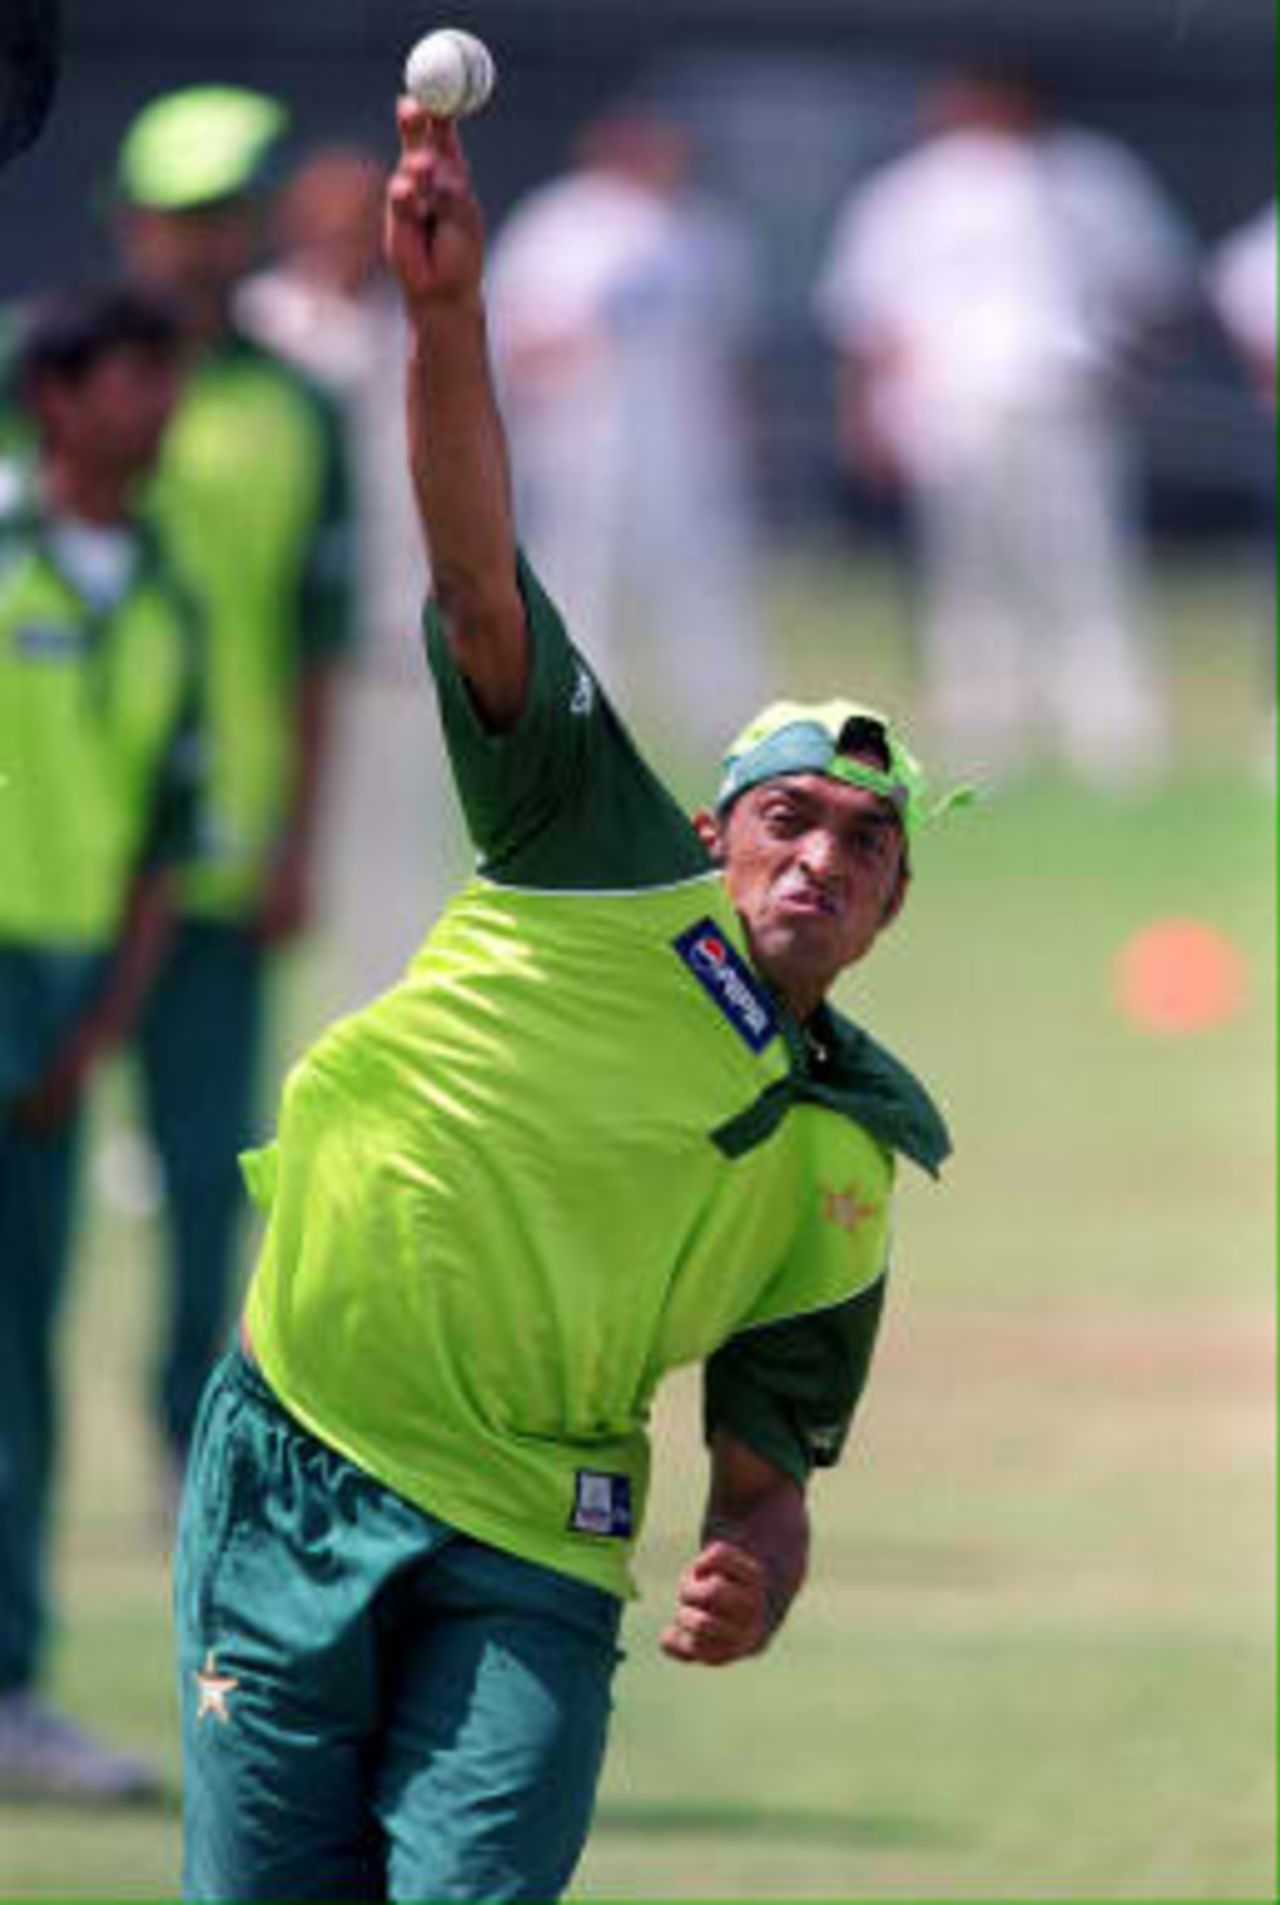 Pakistani fast bowler Shoaib Akhtar warms up at Lords cricket ground in London on the eve of the Cricket World Cup final against Australia.